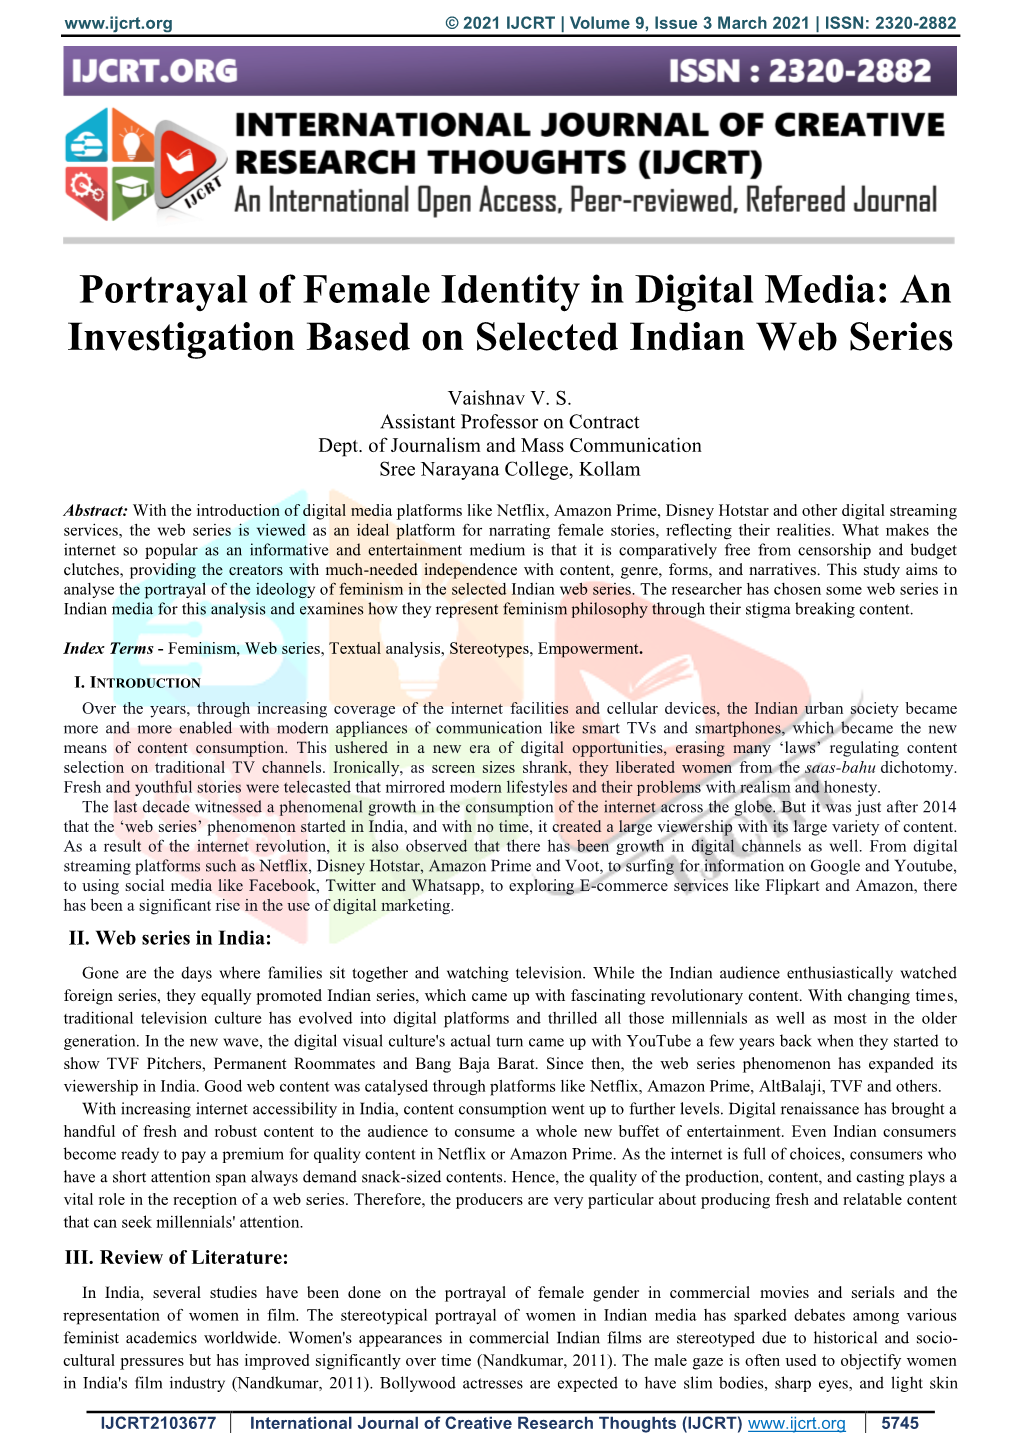 Portrayal of Female Identity in Digital Media: an Investigation Based on Selected Indian Web Series